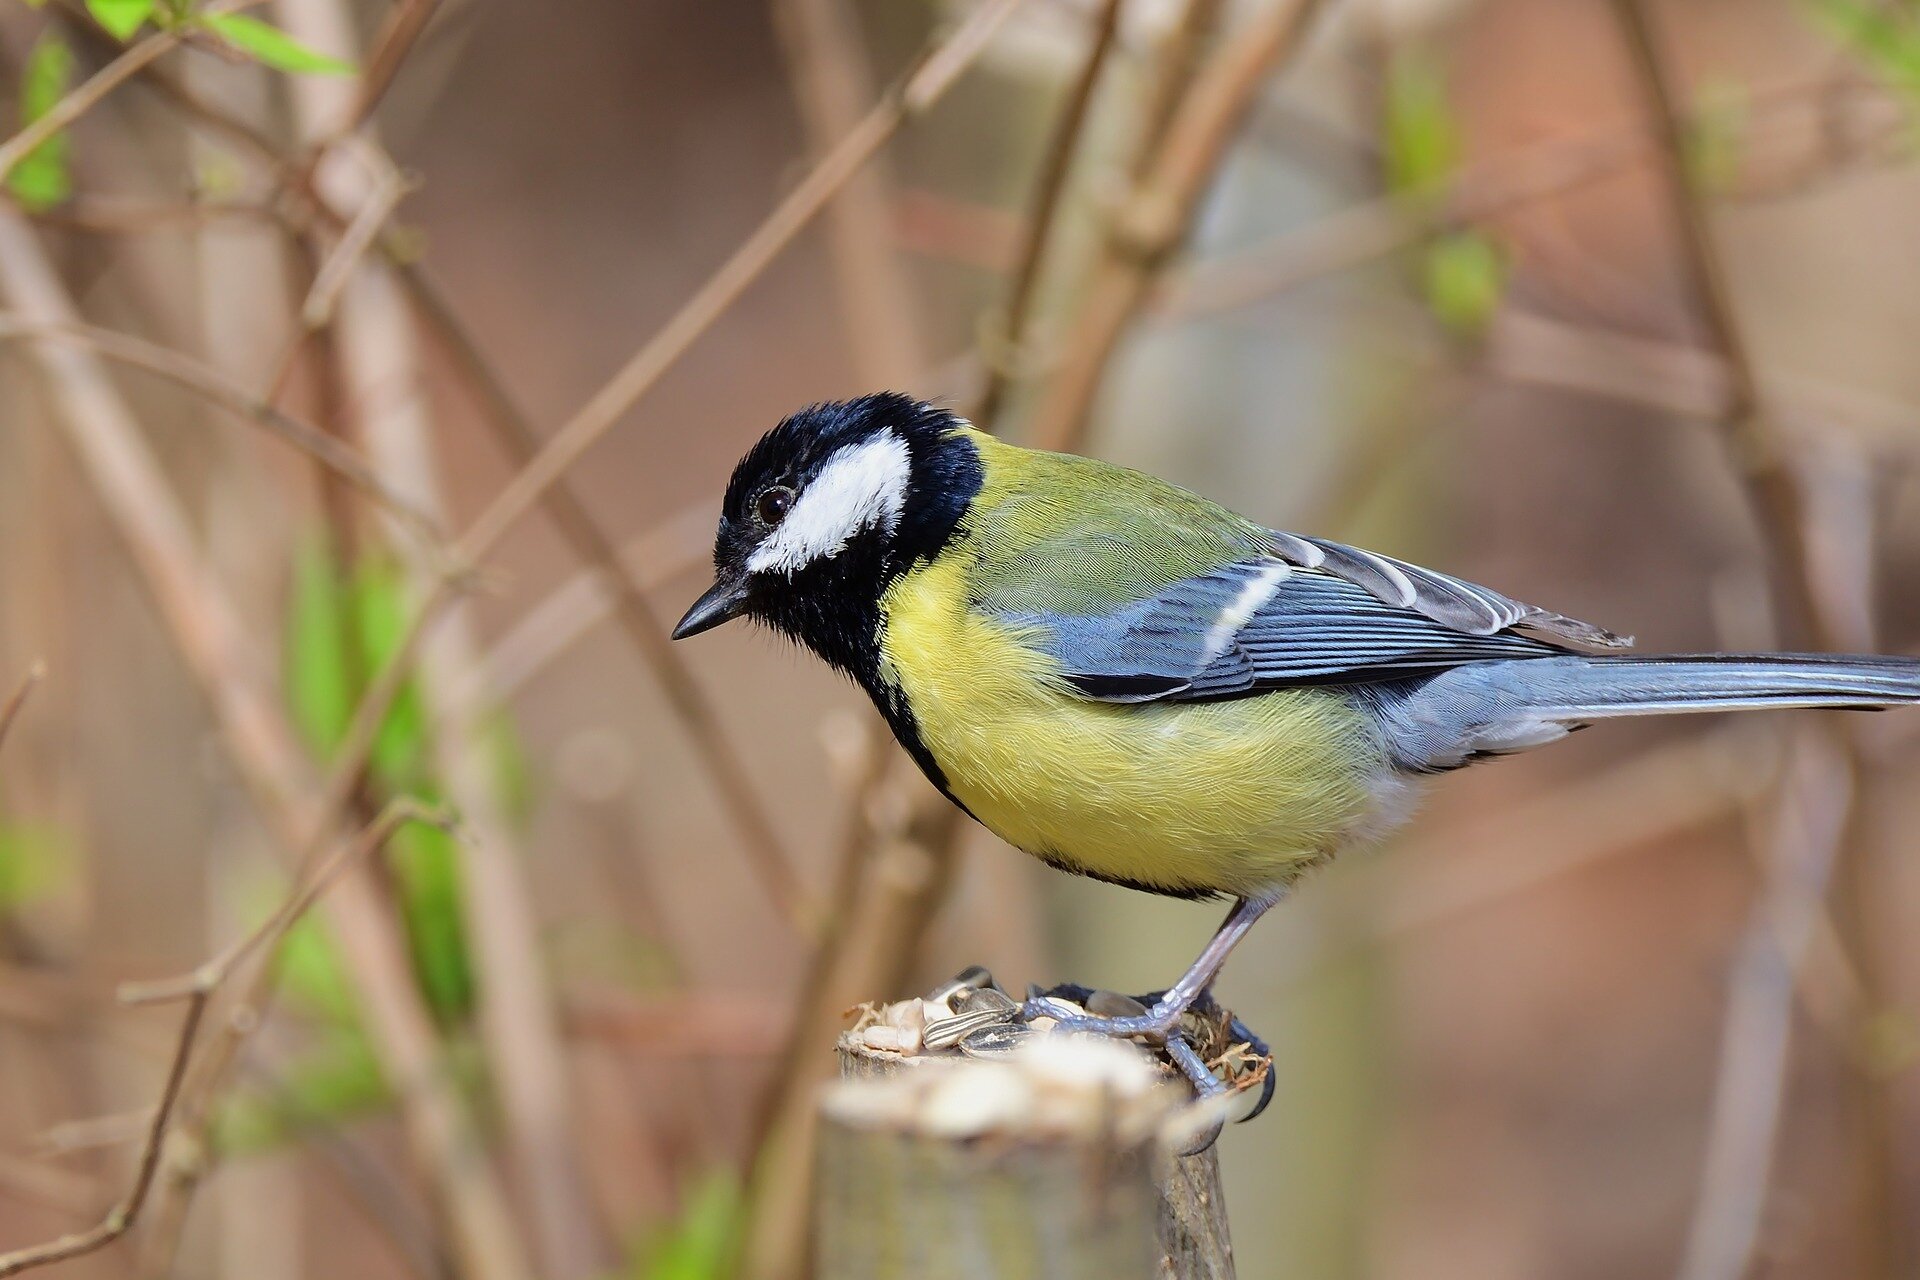 The great tit (Parus major) is a passerine bird in the tit family